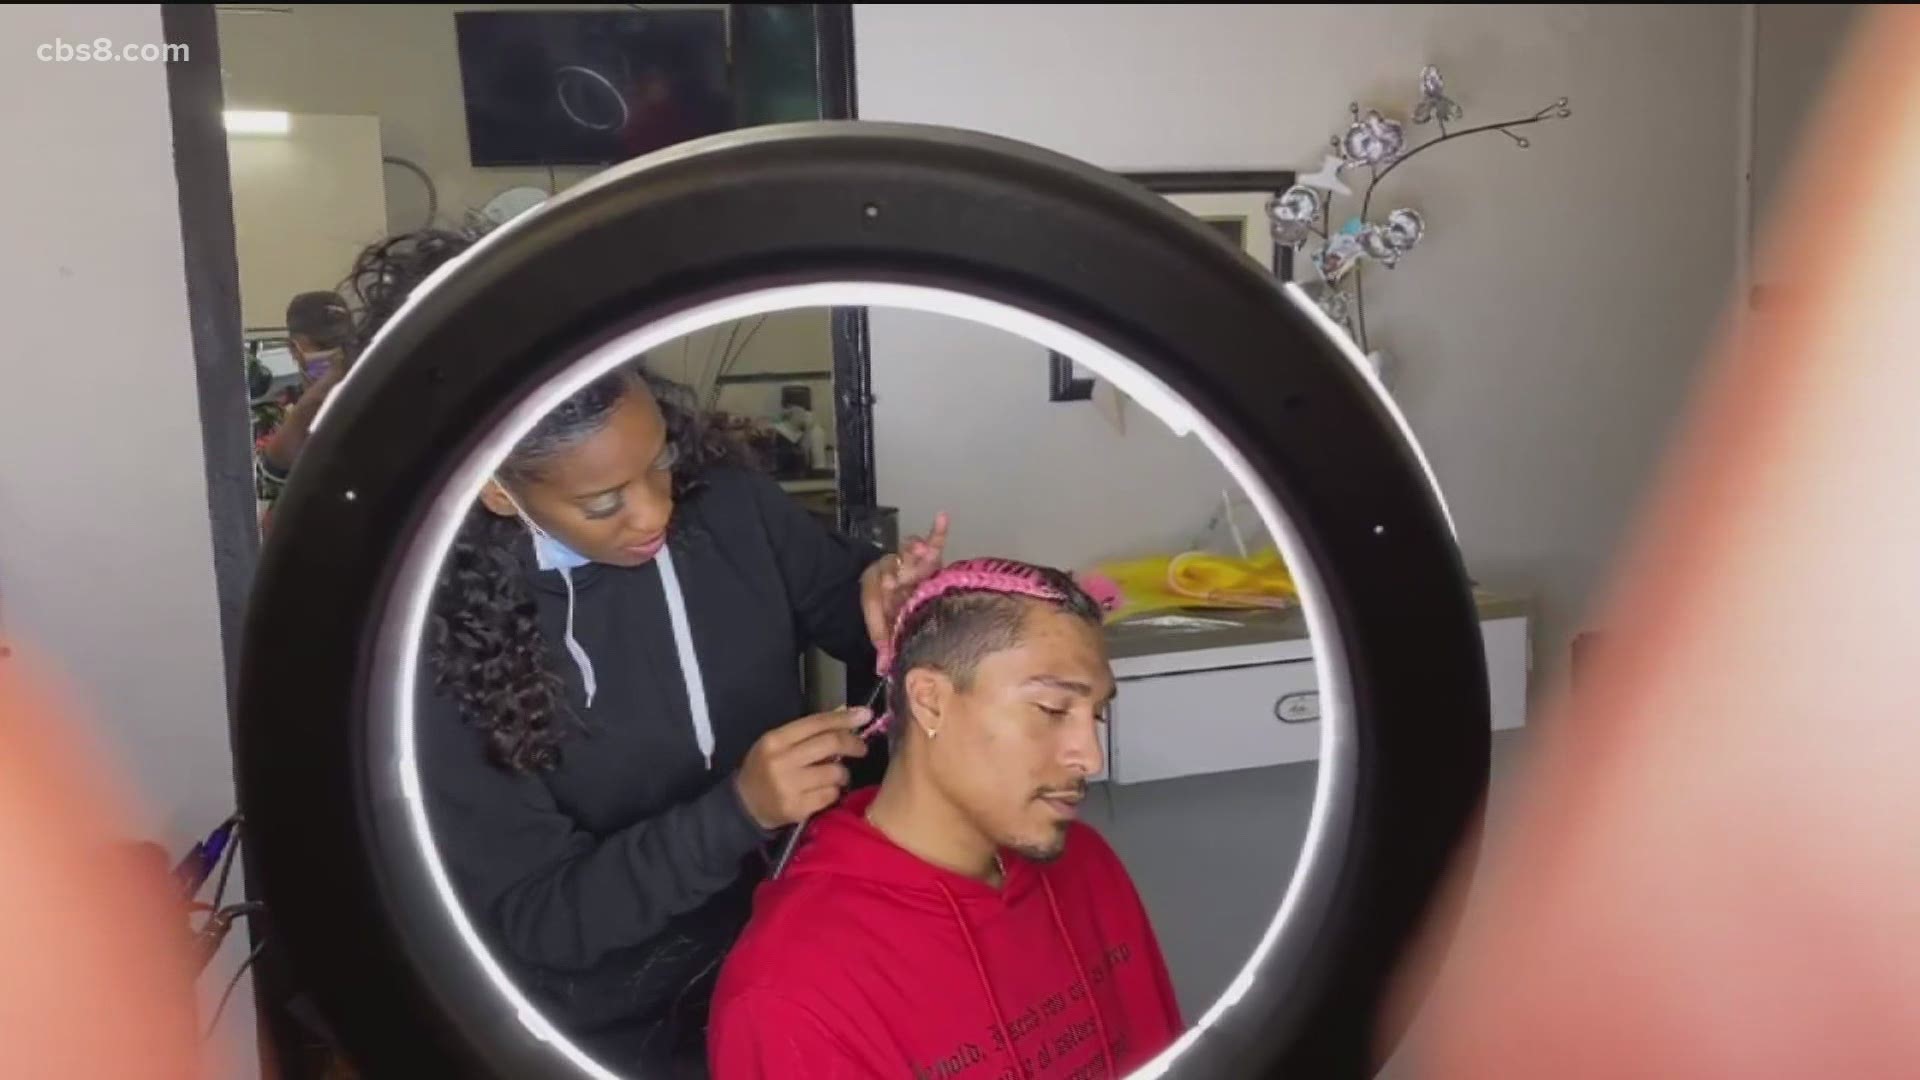 The salon specializes in African American hair care but owner, Staysea Hodge, said all are welcome.